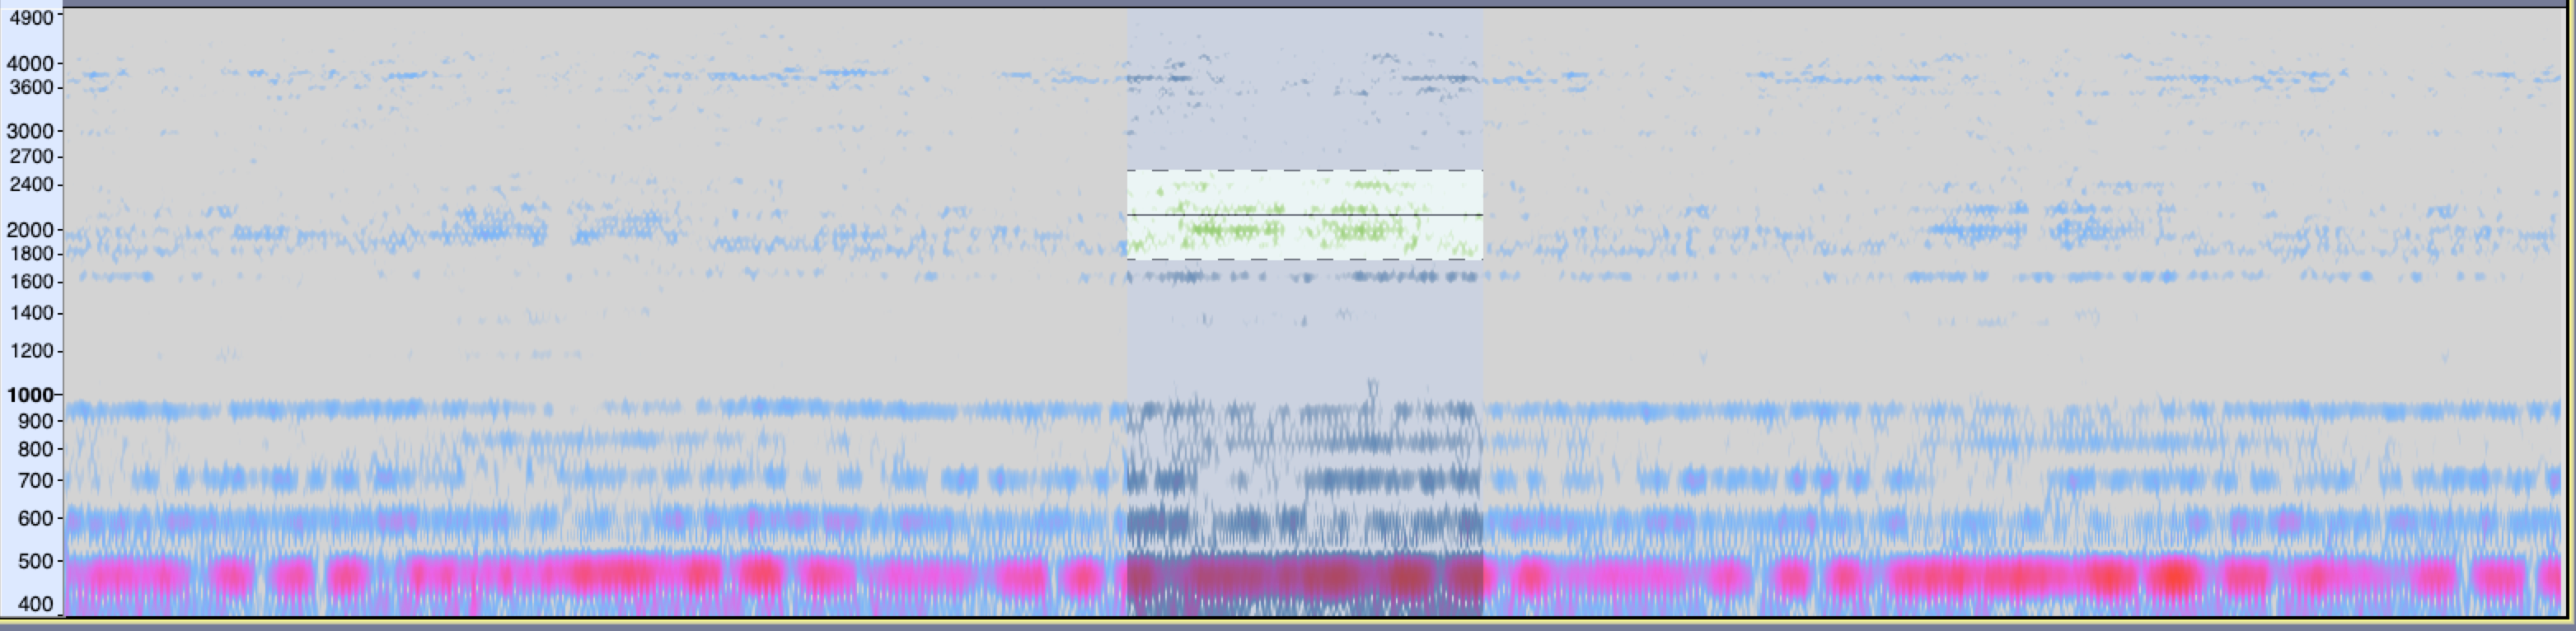 FromMoon-f3-engine-sound-spectrogram.png